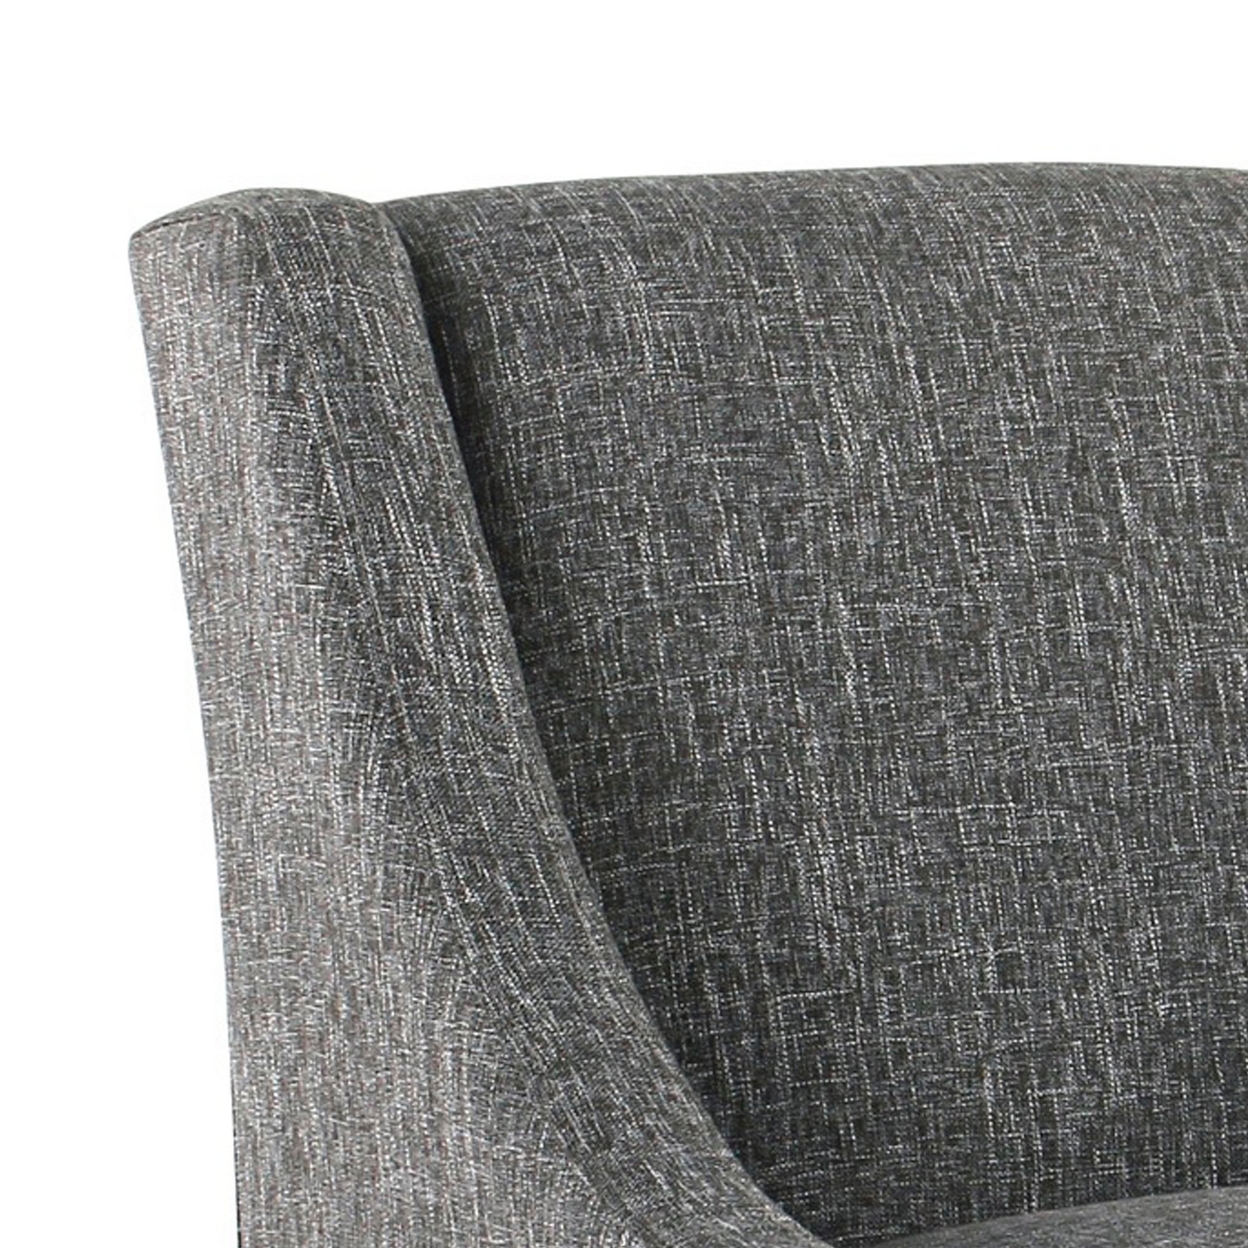 Fabric Upholstered Wooden Accent Chair With Swooping Arms And Nail Head Trim, Gray And Brown- Saltoro Sherpi